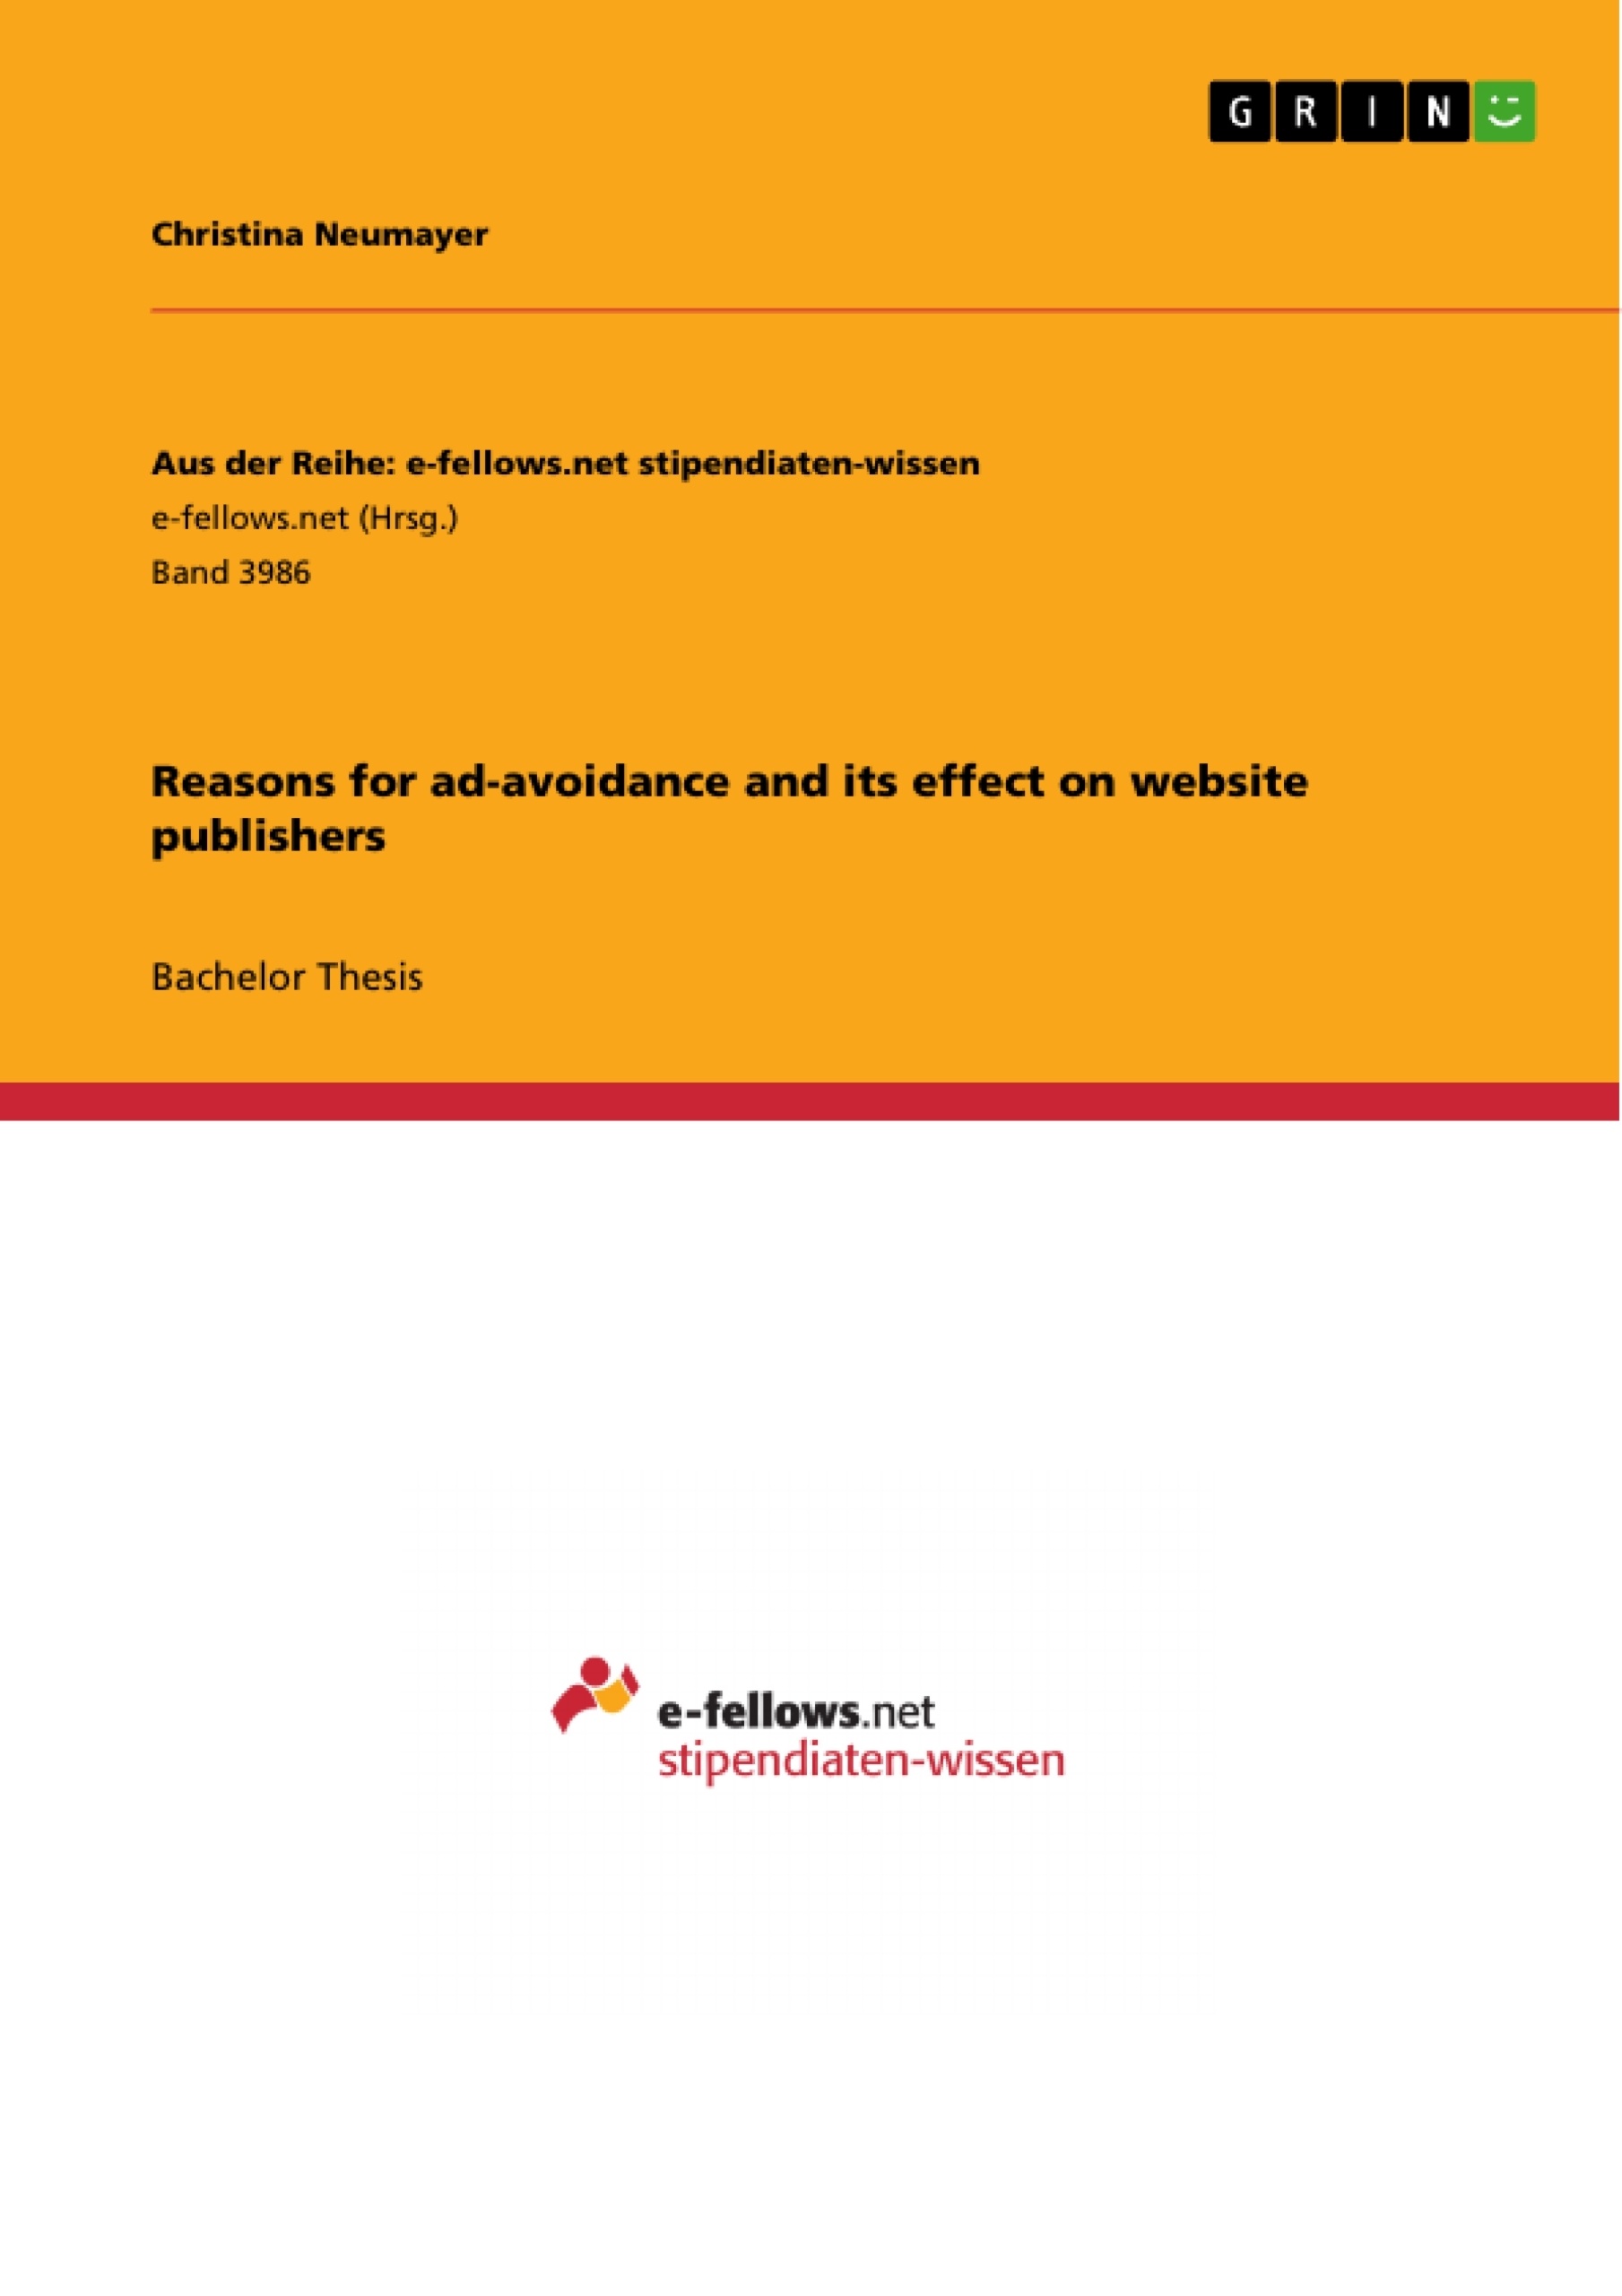 Title: Reasons for ad-avoidance and its effect on website publishers